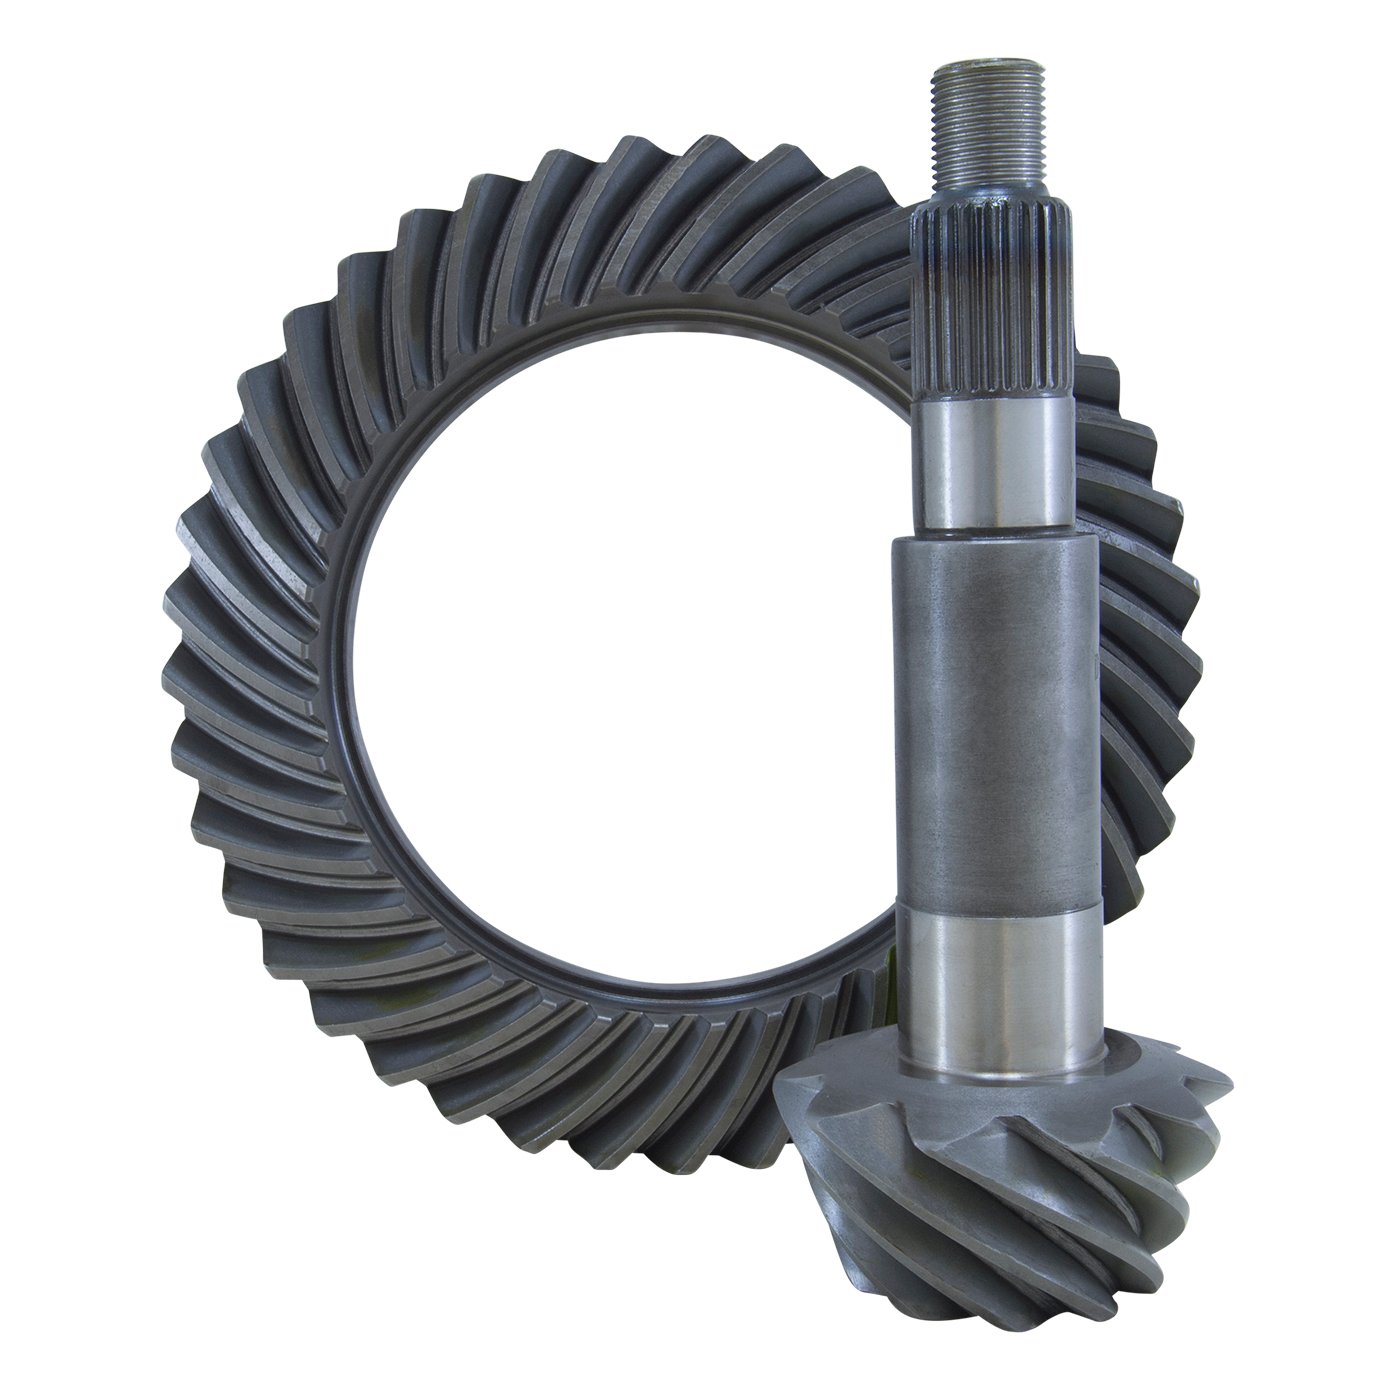 USA Standard ZG D60-586 Replacement Ring & Pinion Gear Set, For Dana 60, 5.86 Ratio